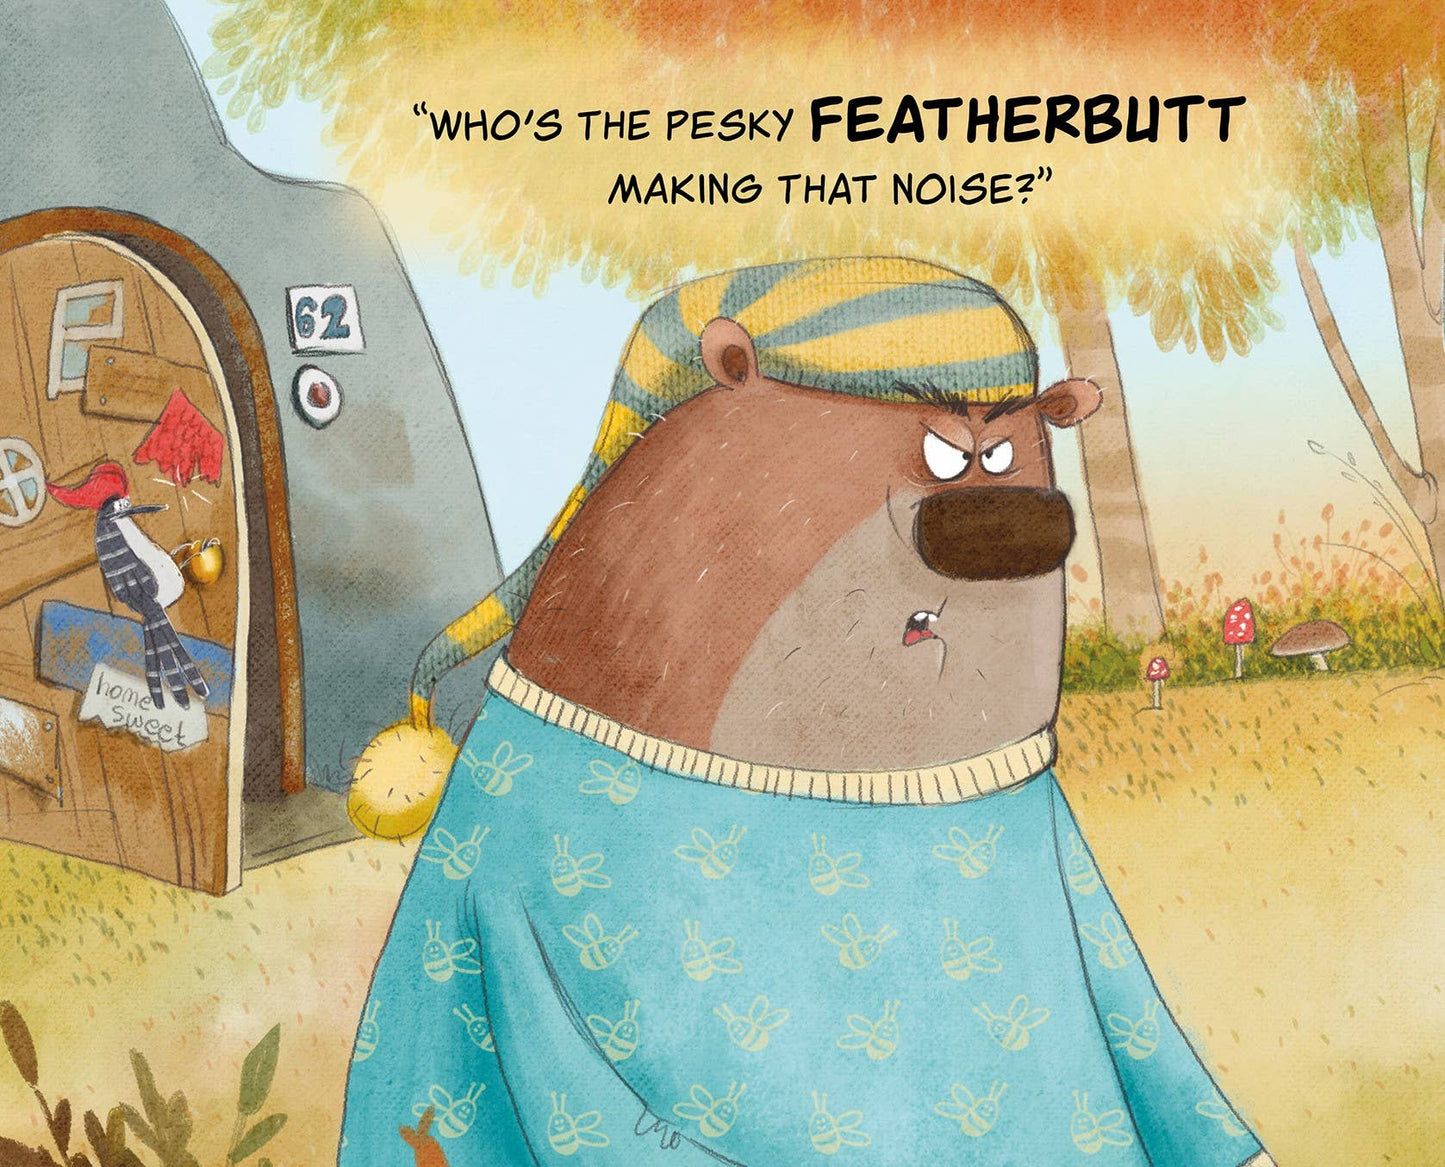 Don't Call Me Fuzzybutt! Picture Book